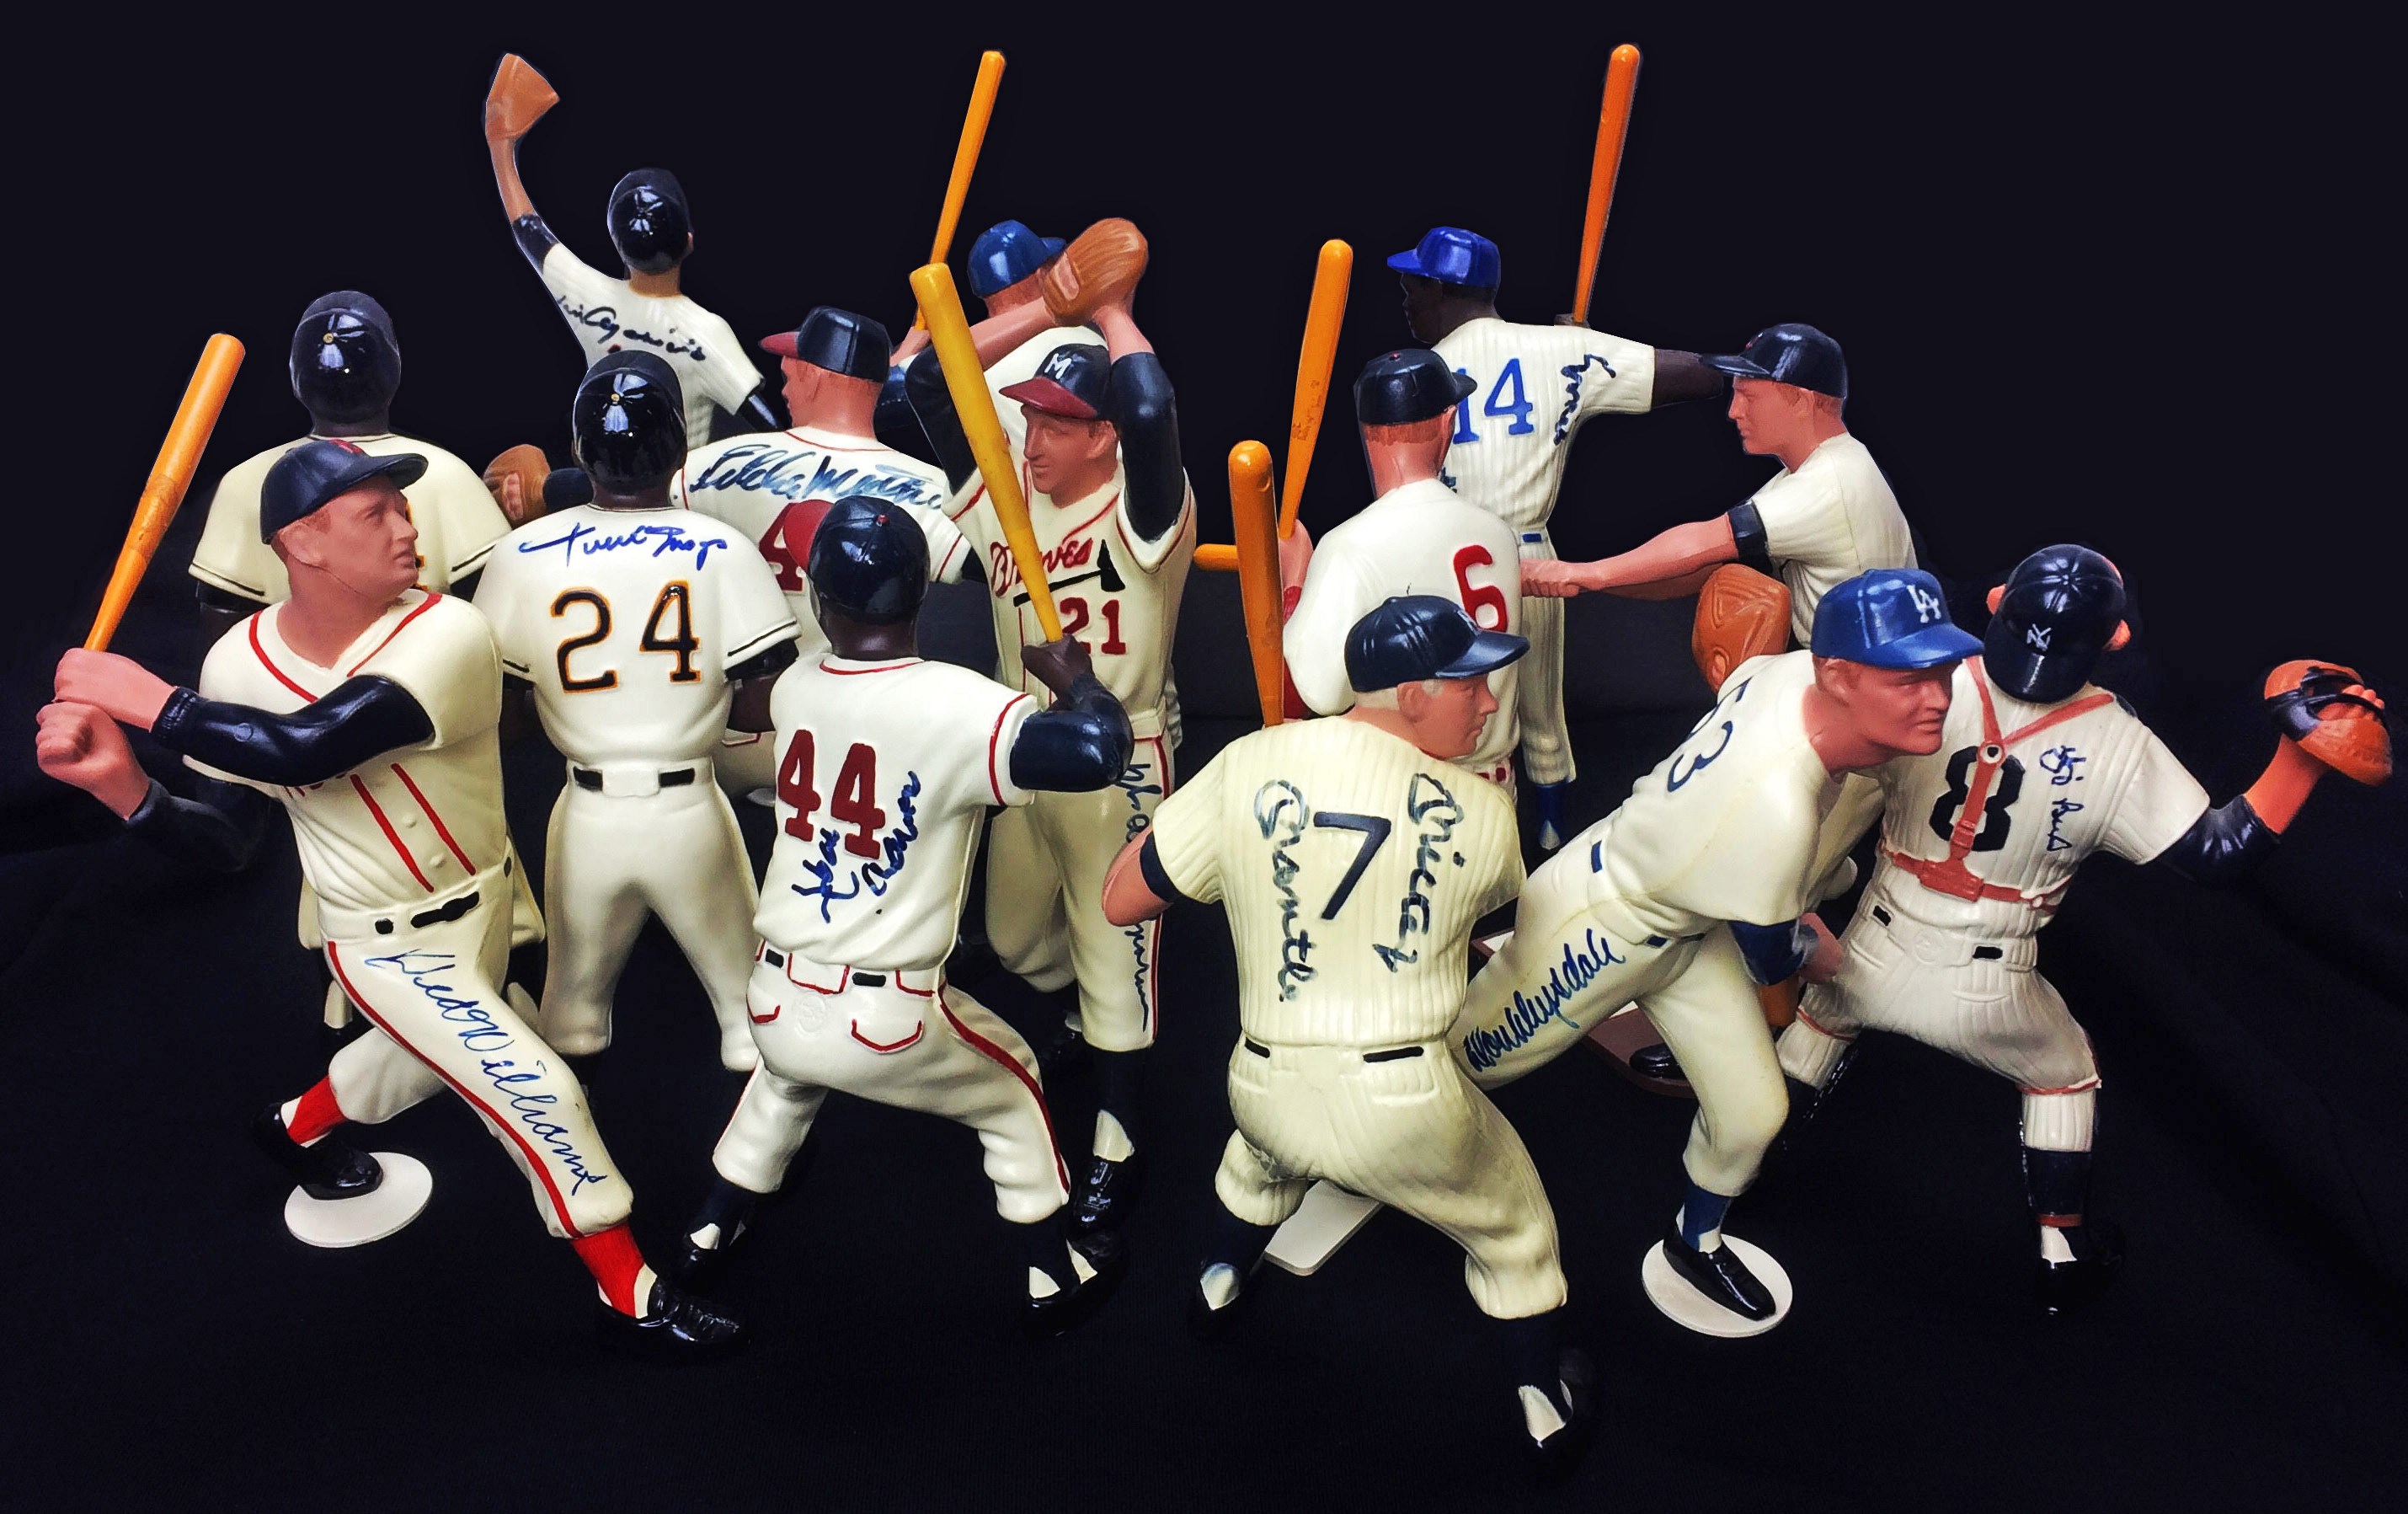 Baseball Autographs - Beautiful 25th Anniversary Hartland Statues Complete Set - 15 Signed with Mantle & Williams (21)